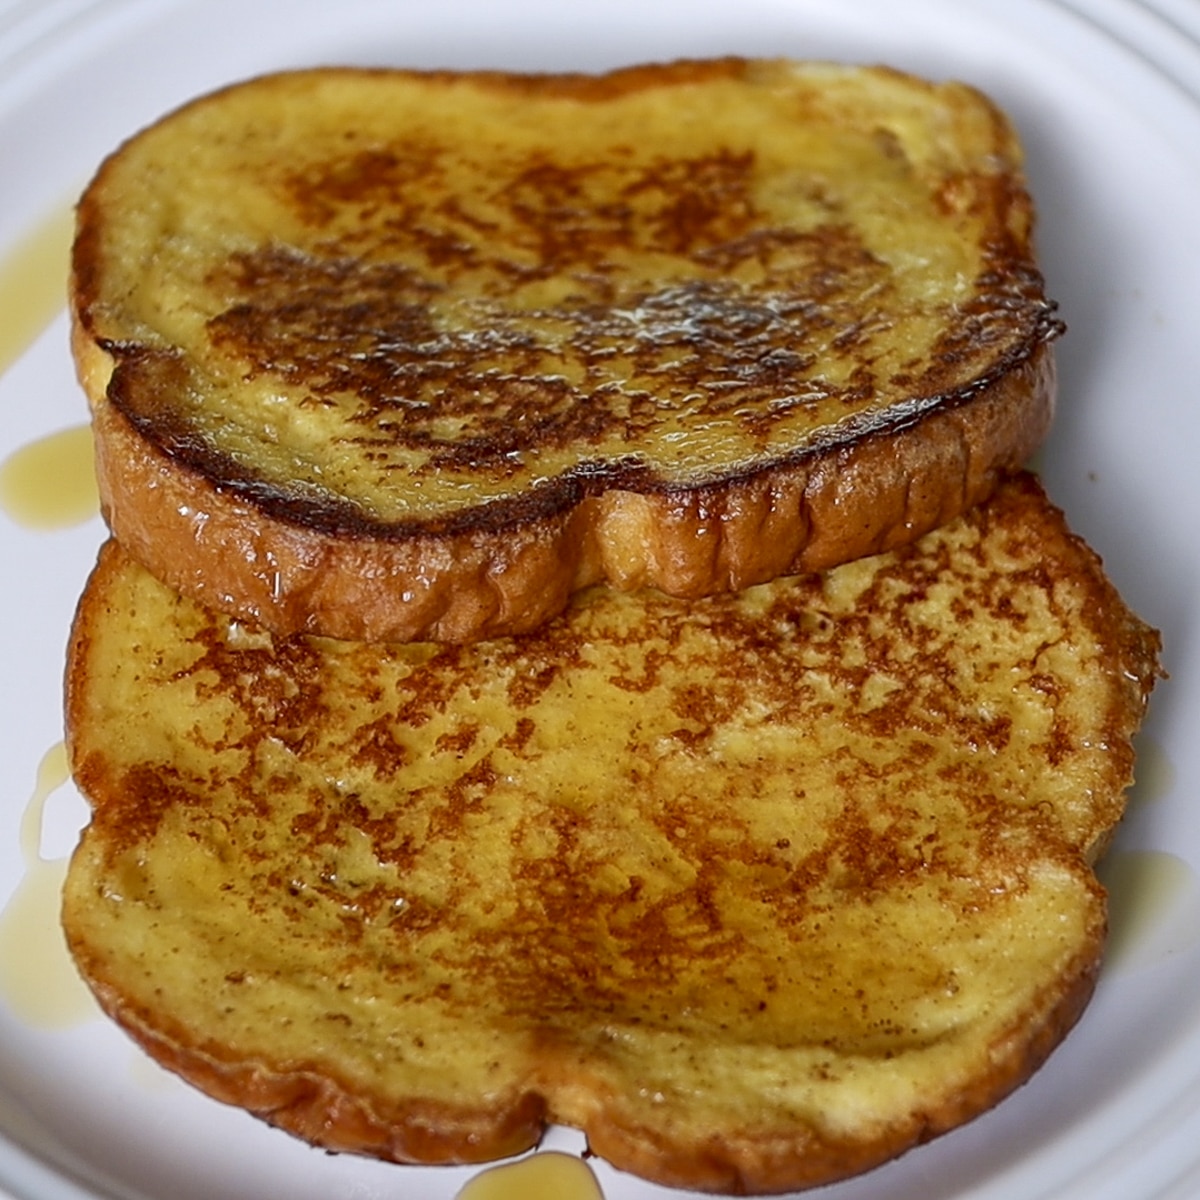 French toast with syrup on a plate
